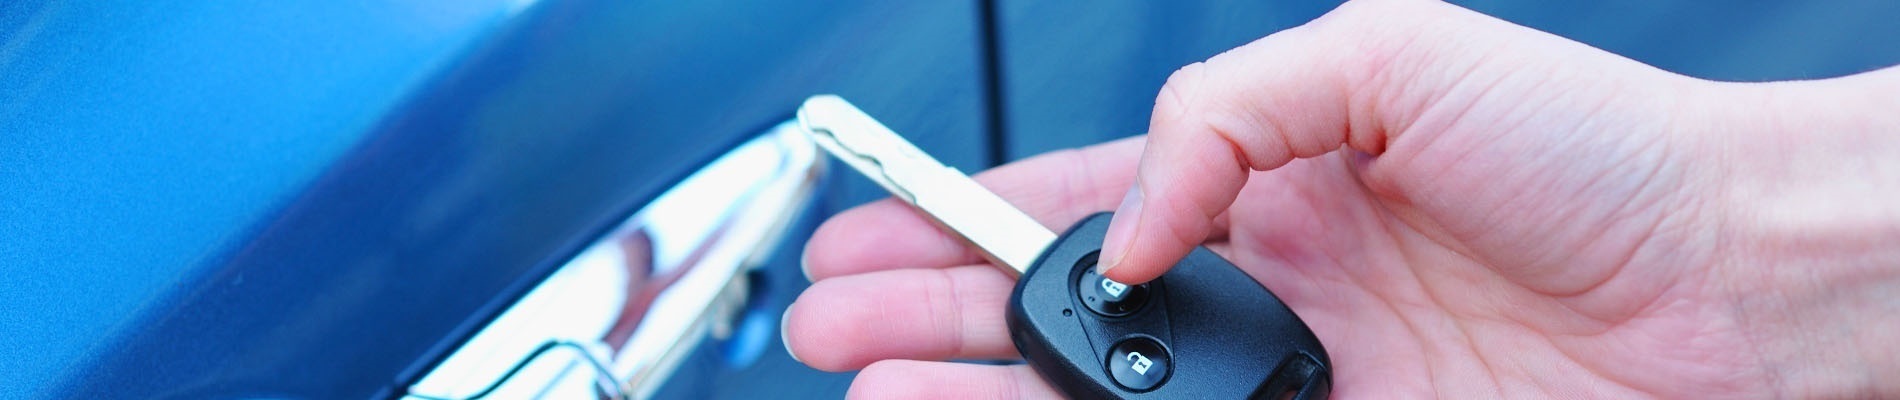 Our Car locksmith prices are always reasonable.